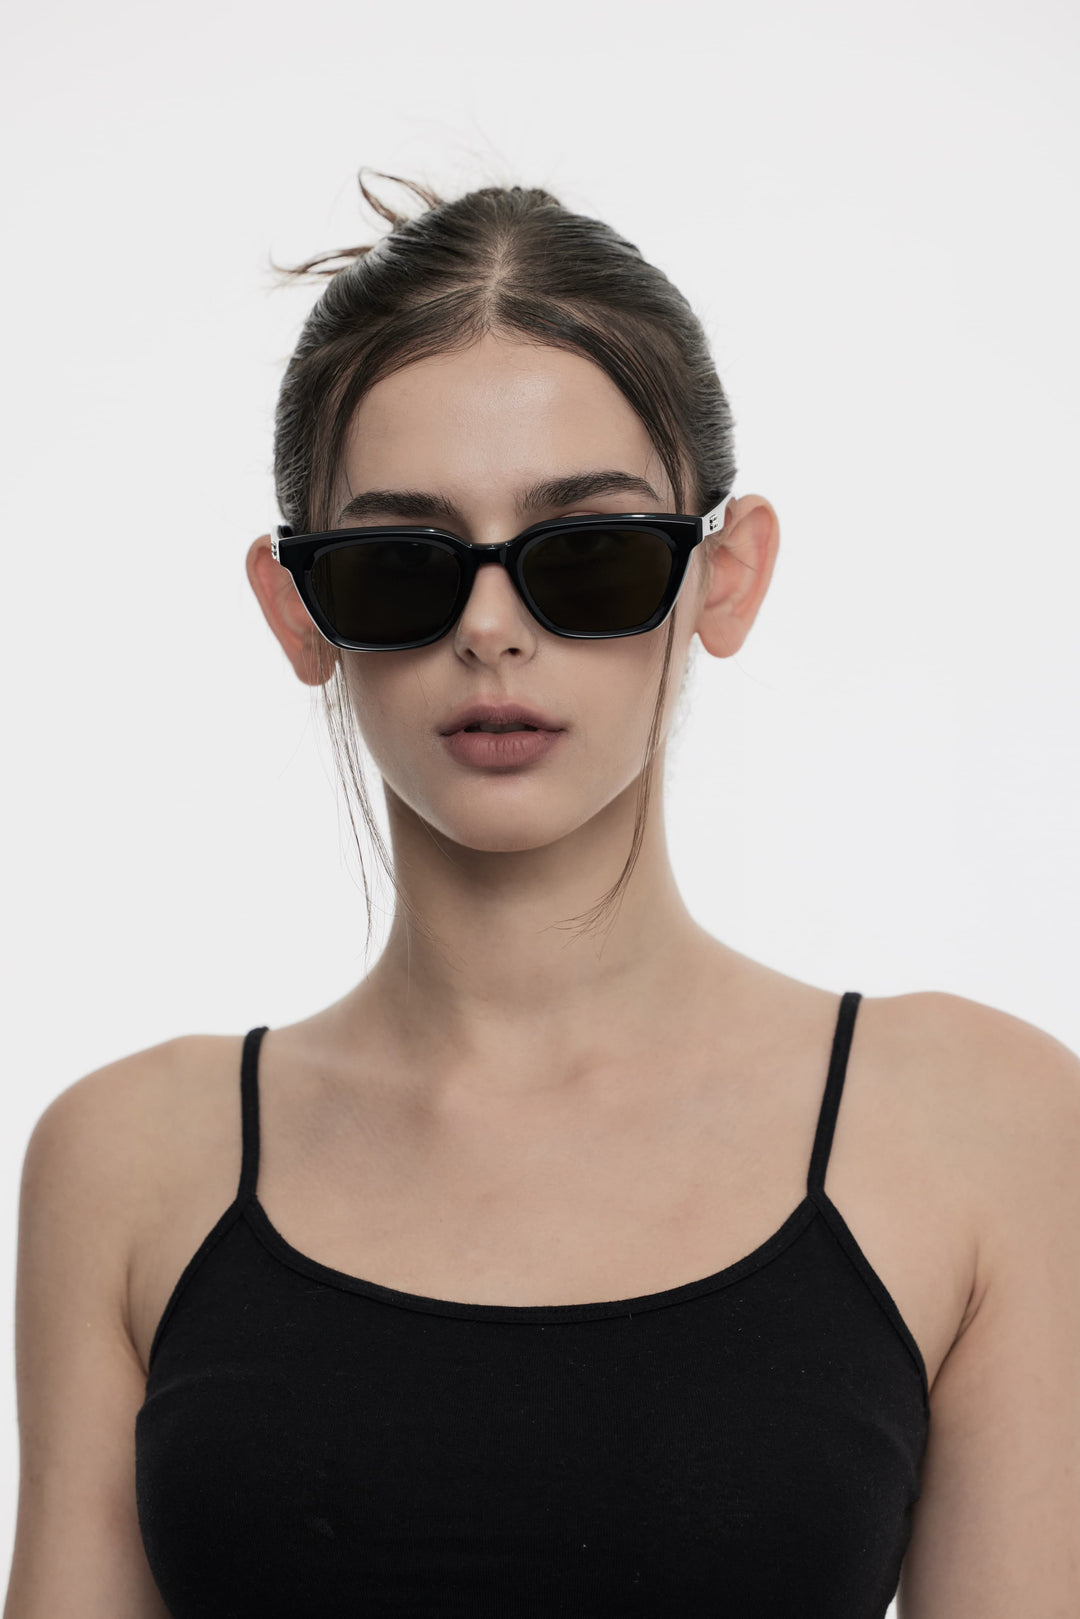 Female Model of her front face wearing Burr Puzzle’s Shadow in black square stylish sunglasses from Mercury Retrograde